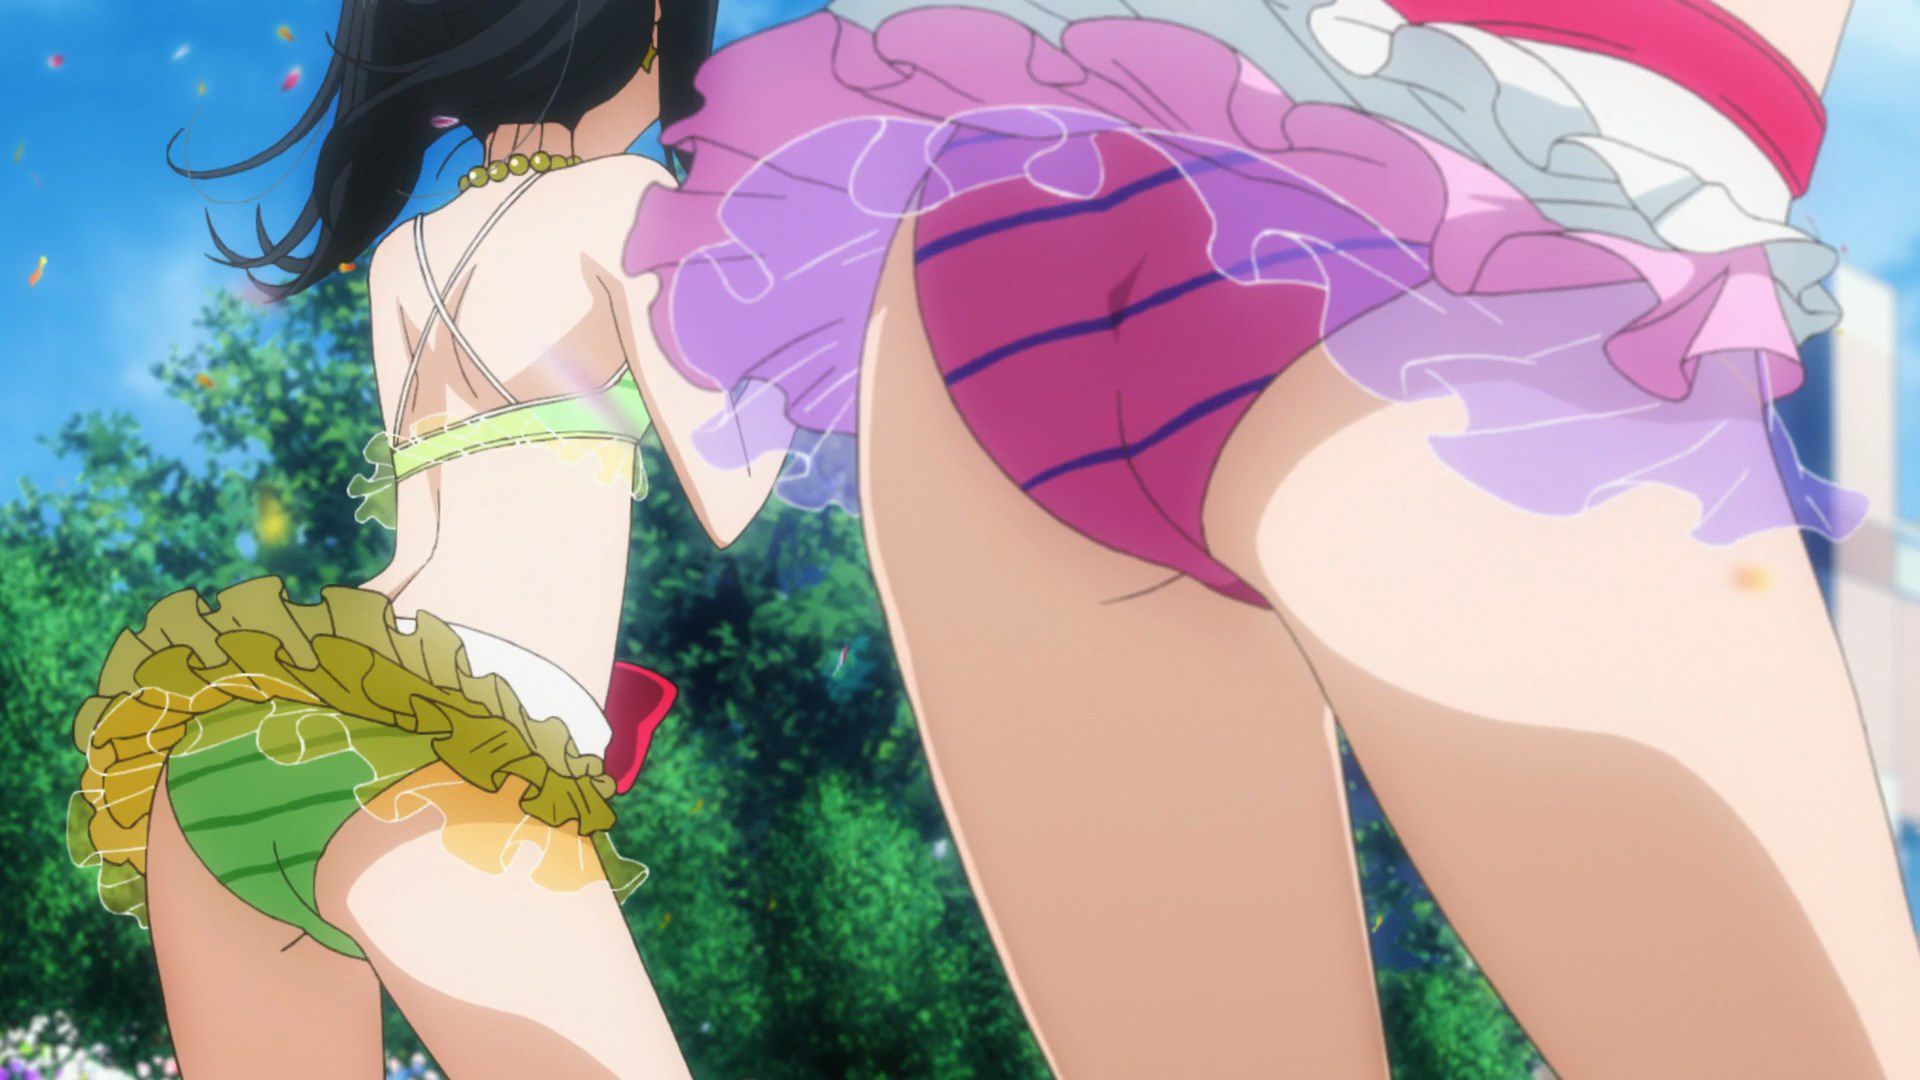 [God images] "love live! ' Μm ' PV's leg is too erotic everyone wakes up to a leg fetish of wwwww 14